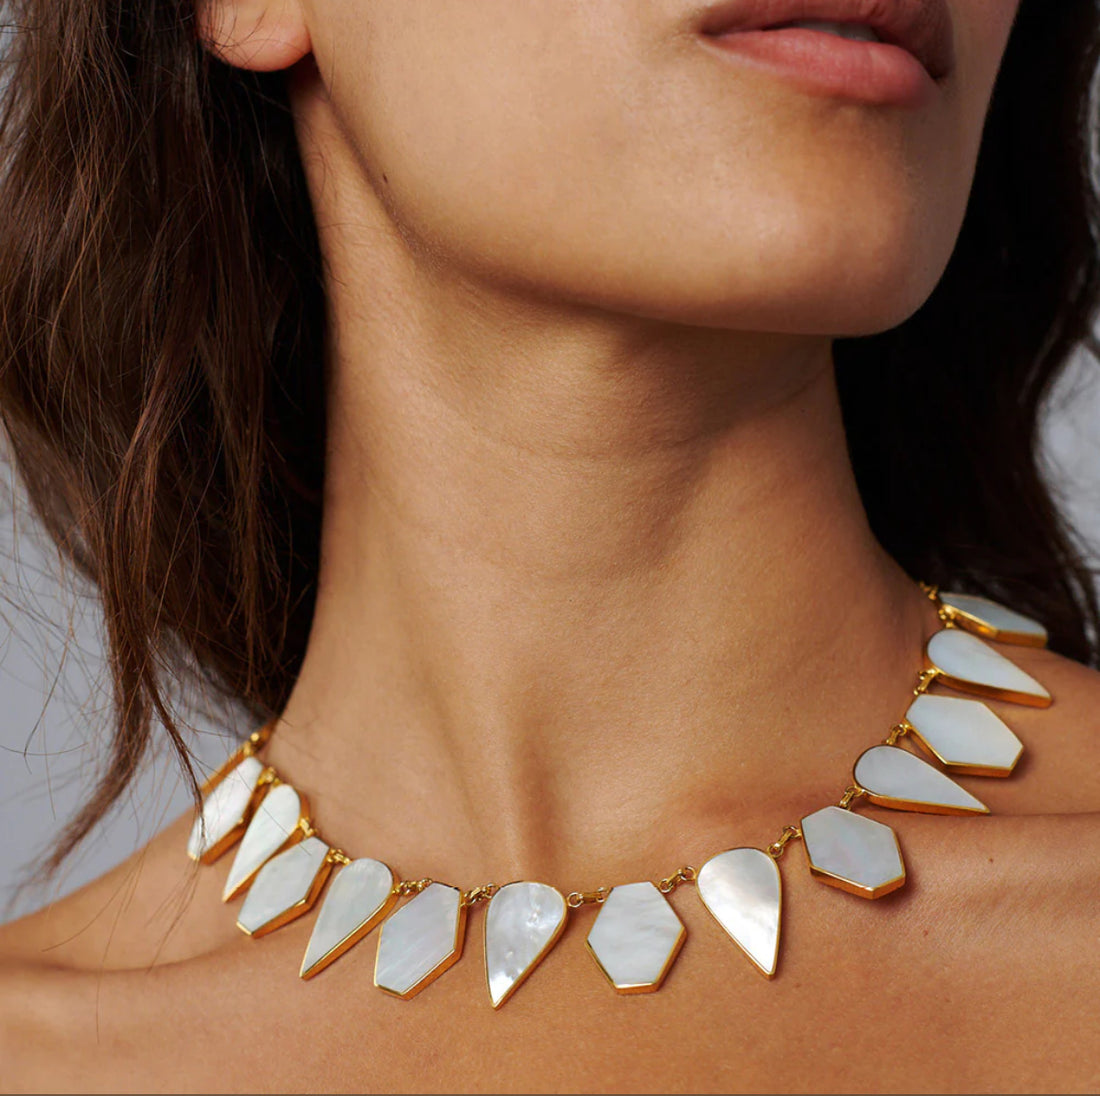 Warrioress Mother of Pearl Necklace